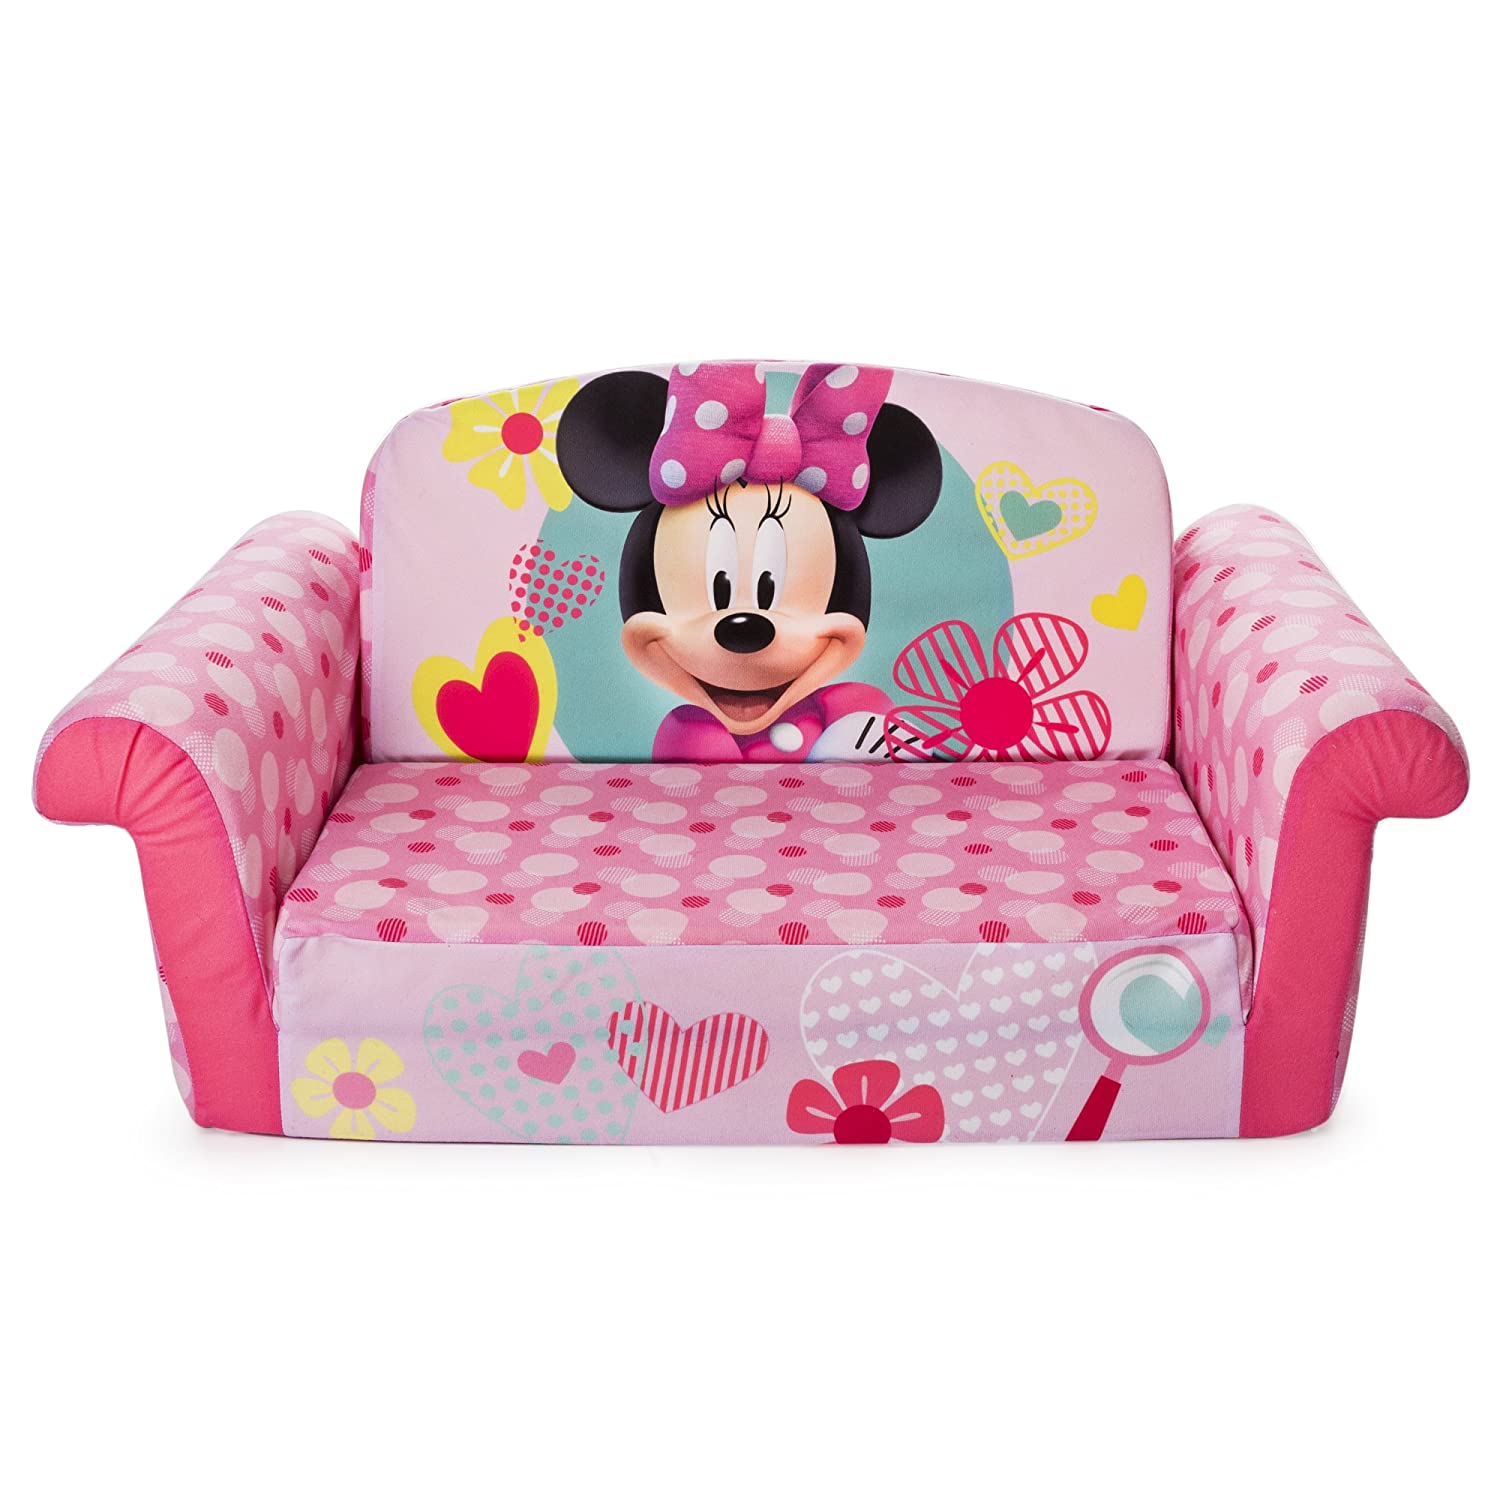 Marshmallow Furniture, Children's 2 in 1 Flip Open Foam Sofa, Minnie Mouse, by Spin Master